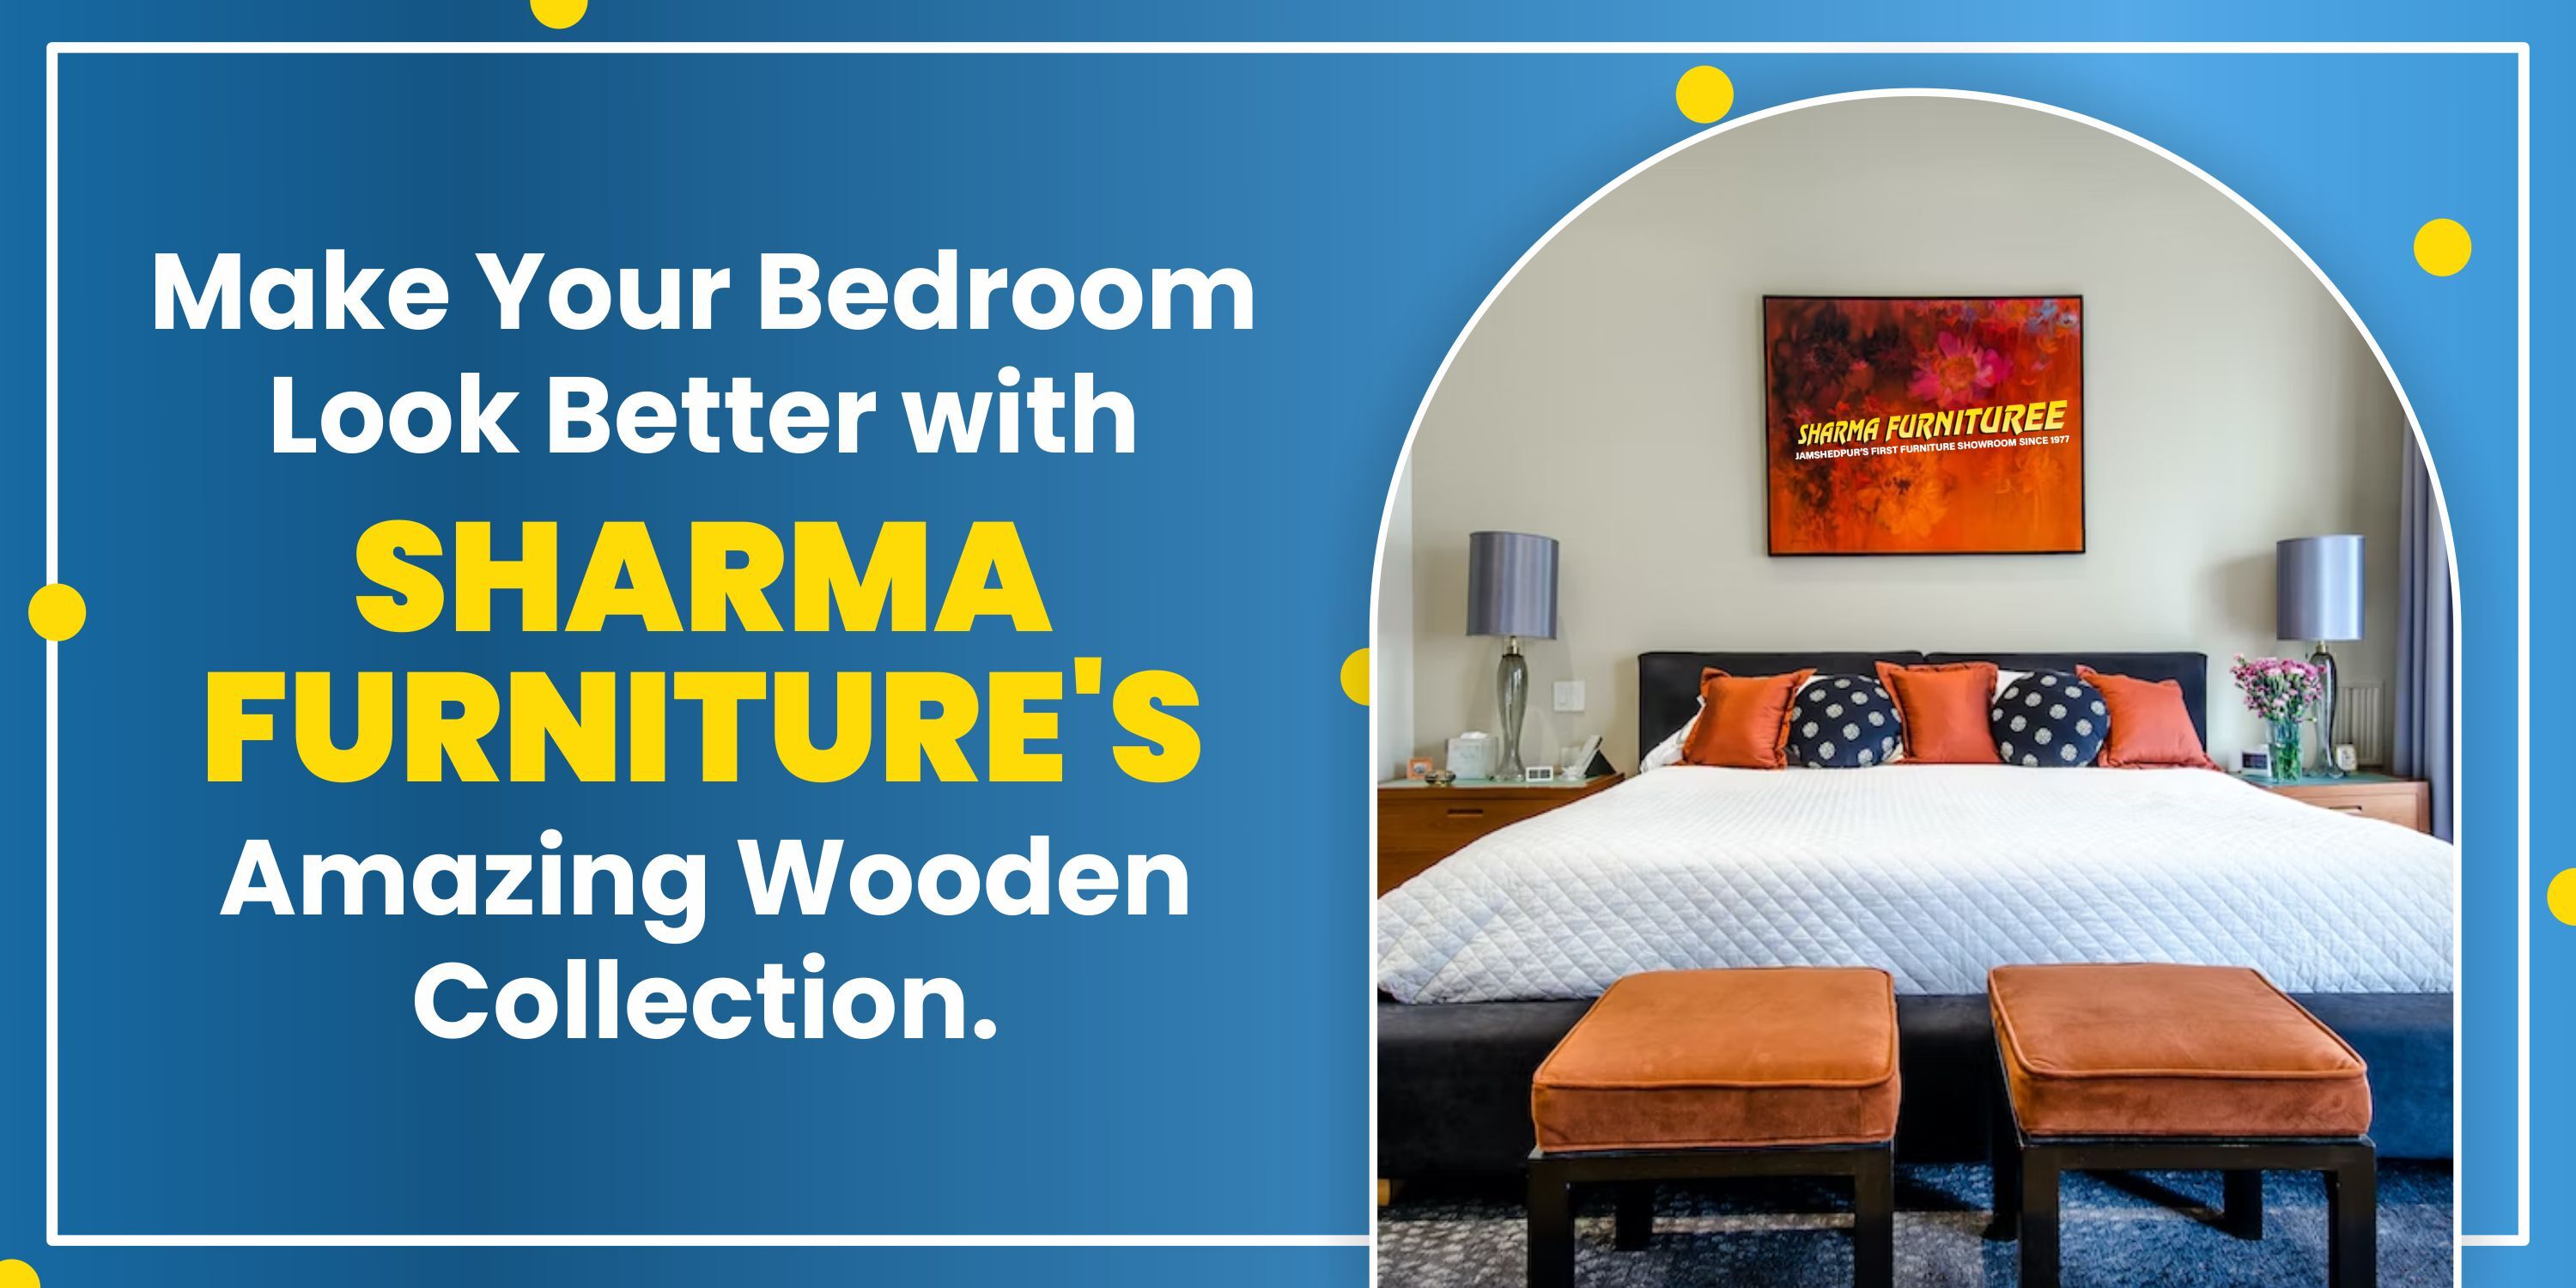 Bedroom looks better with sharma furniture's amazing wooden collection